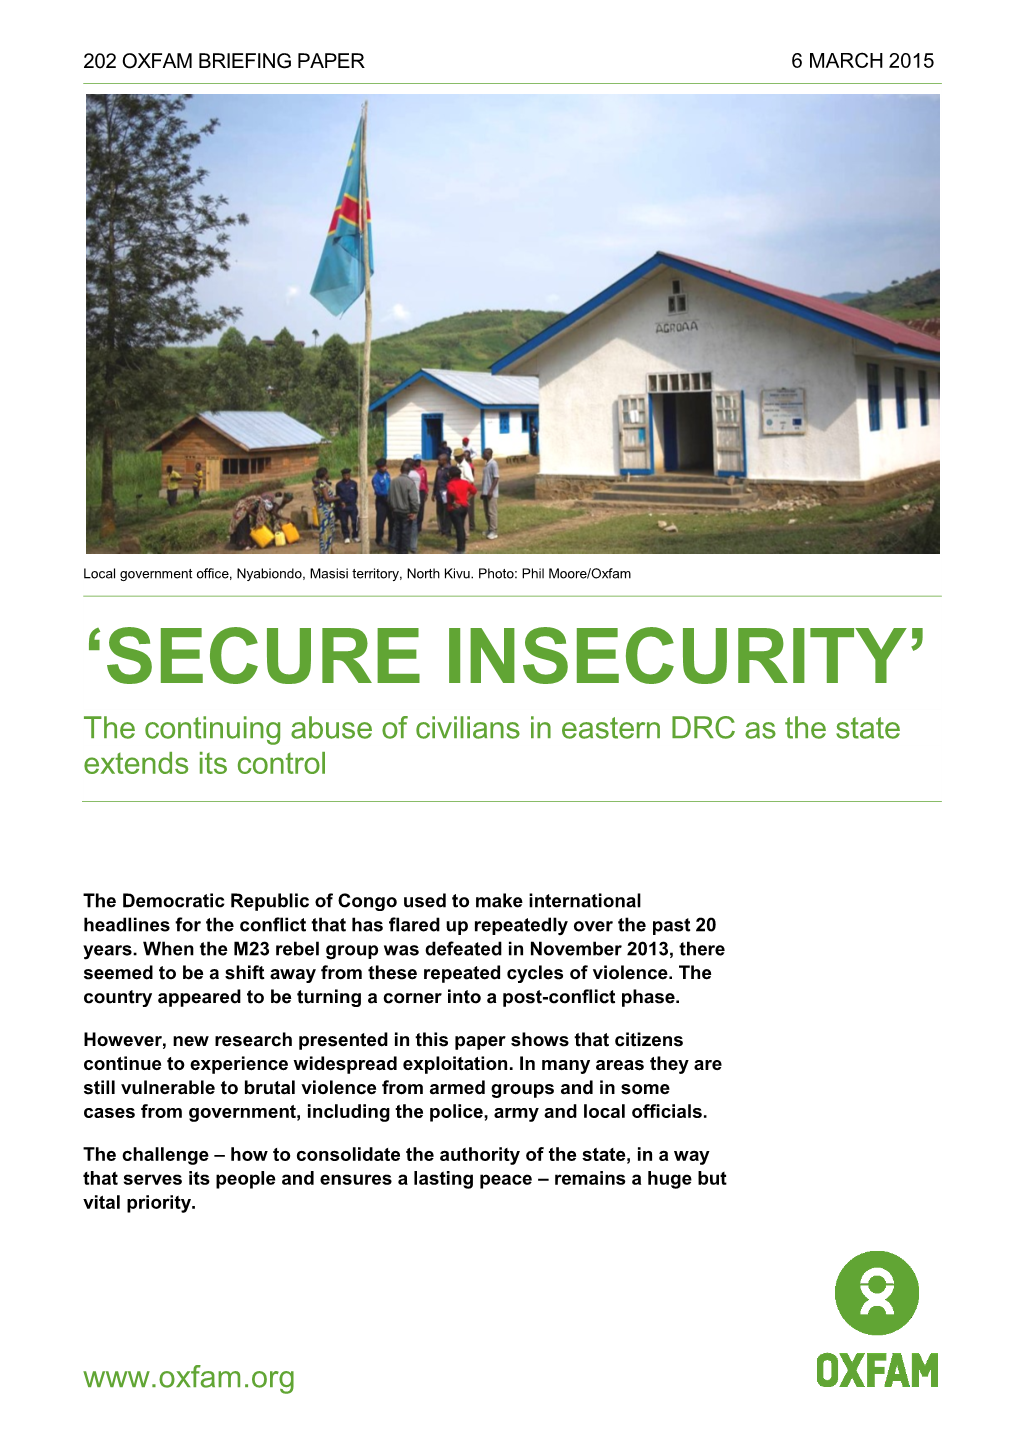 Secure Insecurity: the Continuing Abuse of Civilians in Eastern DRC